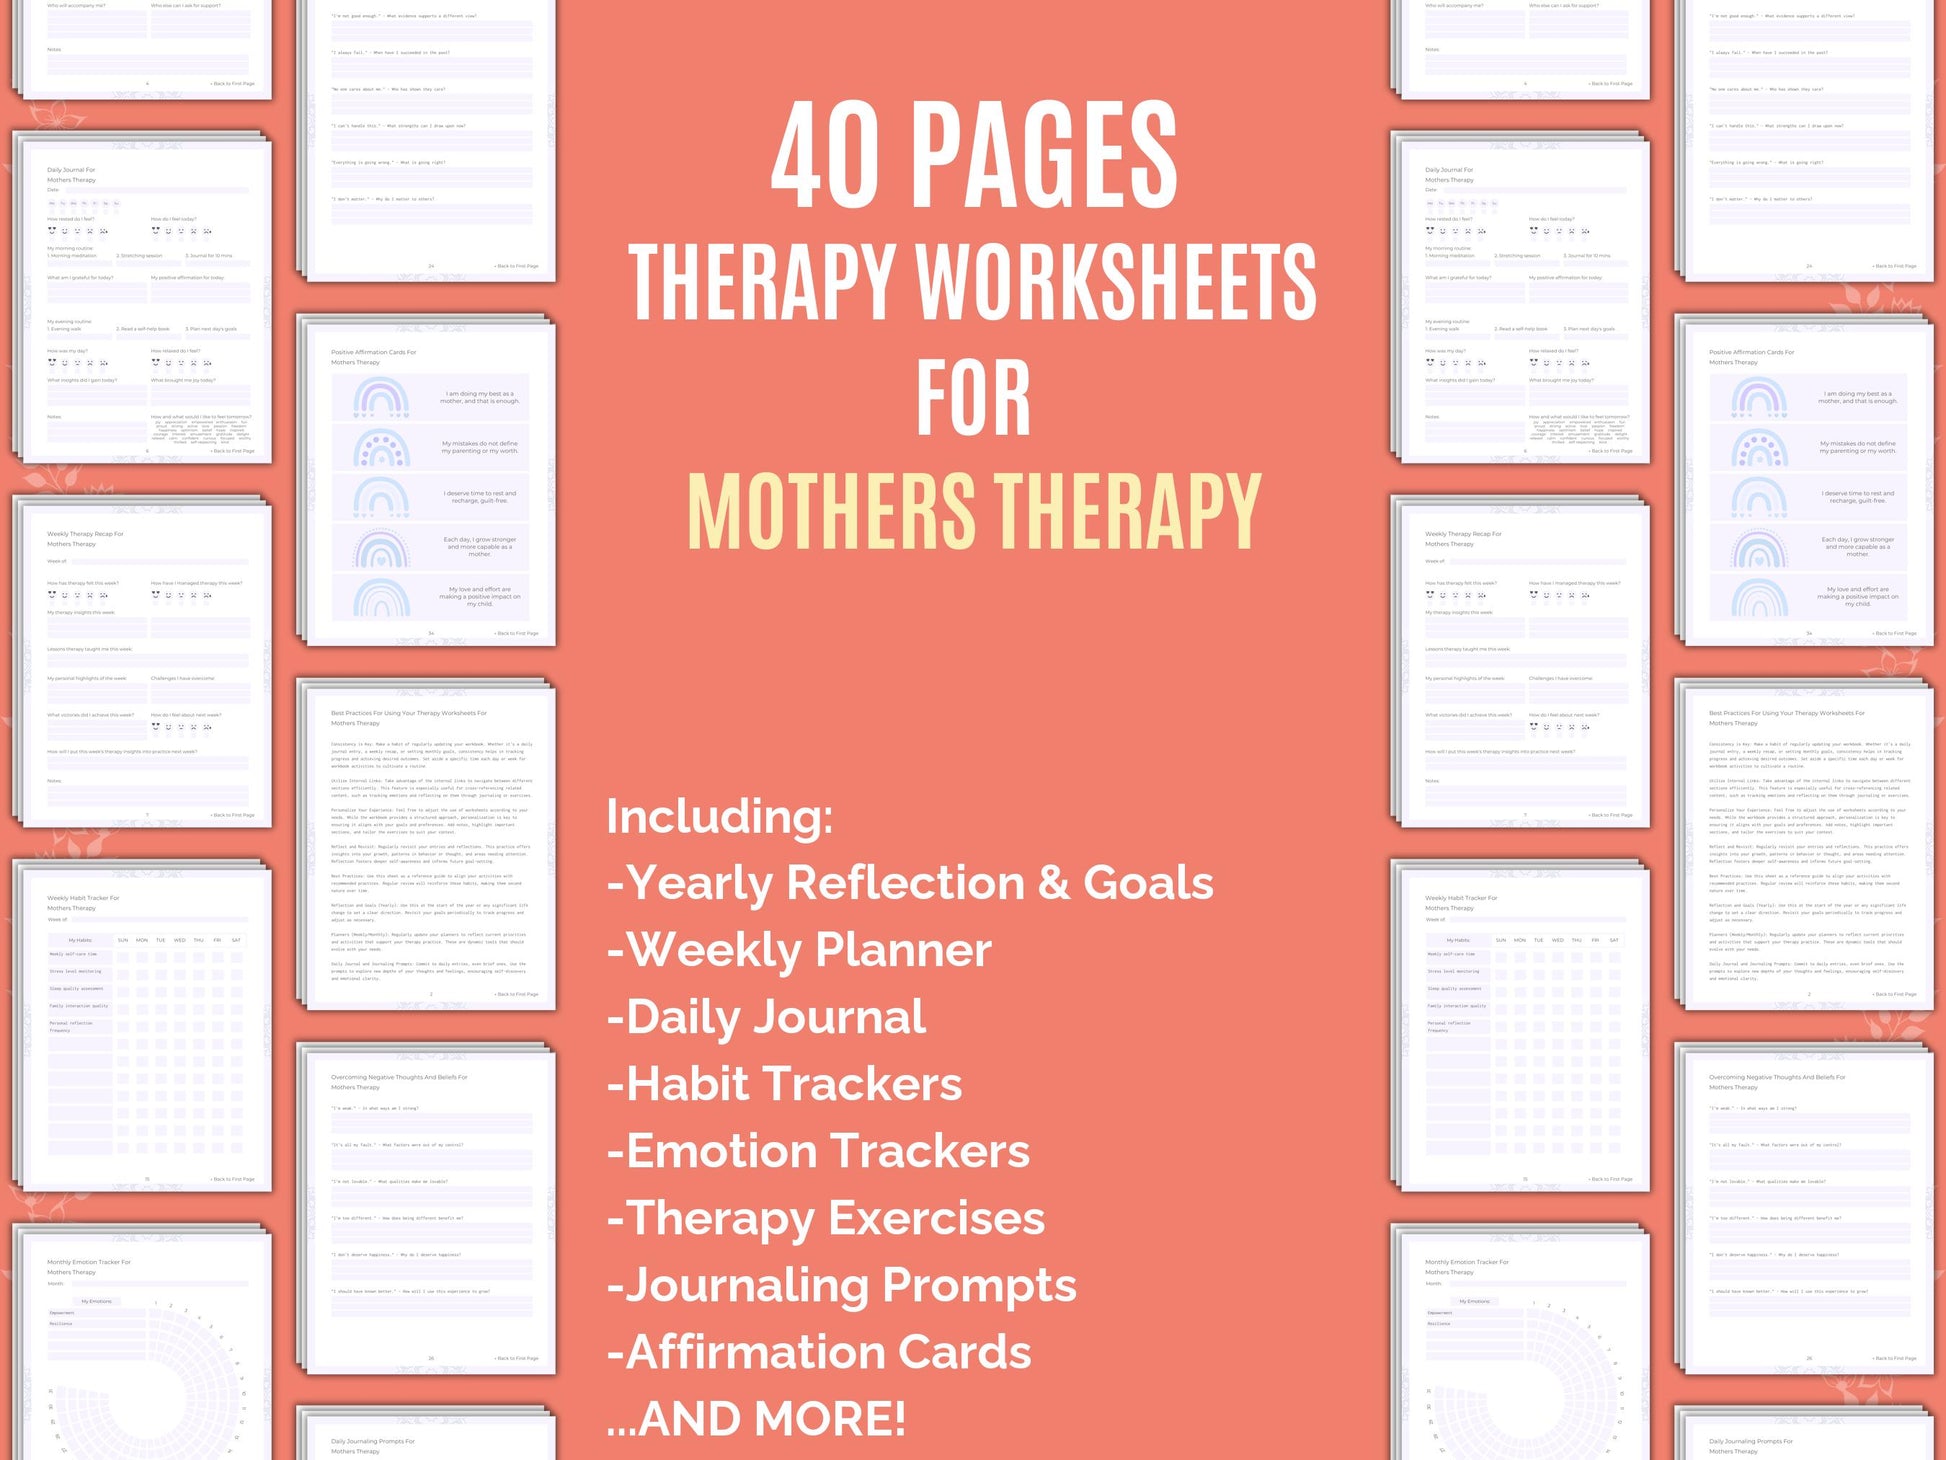 Mothers Goal Setting, Mothers Workbooks, Mothers Cheat Sheet, Mothers Tools, Mothers Resources, Mothers Templates, Mothers Journals, Mothers Journaling, Mothers Therapy, Mothers Planners, Mothers Counseling, Mothers Notes